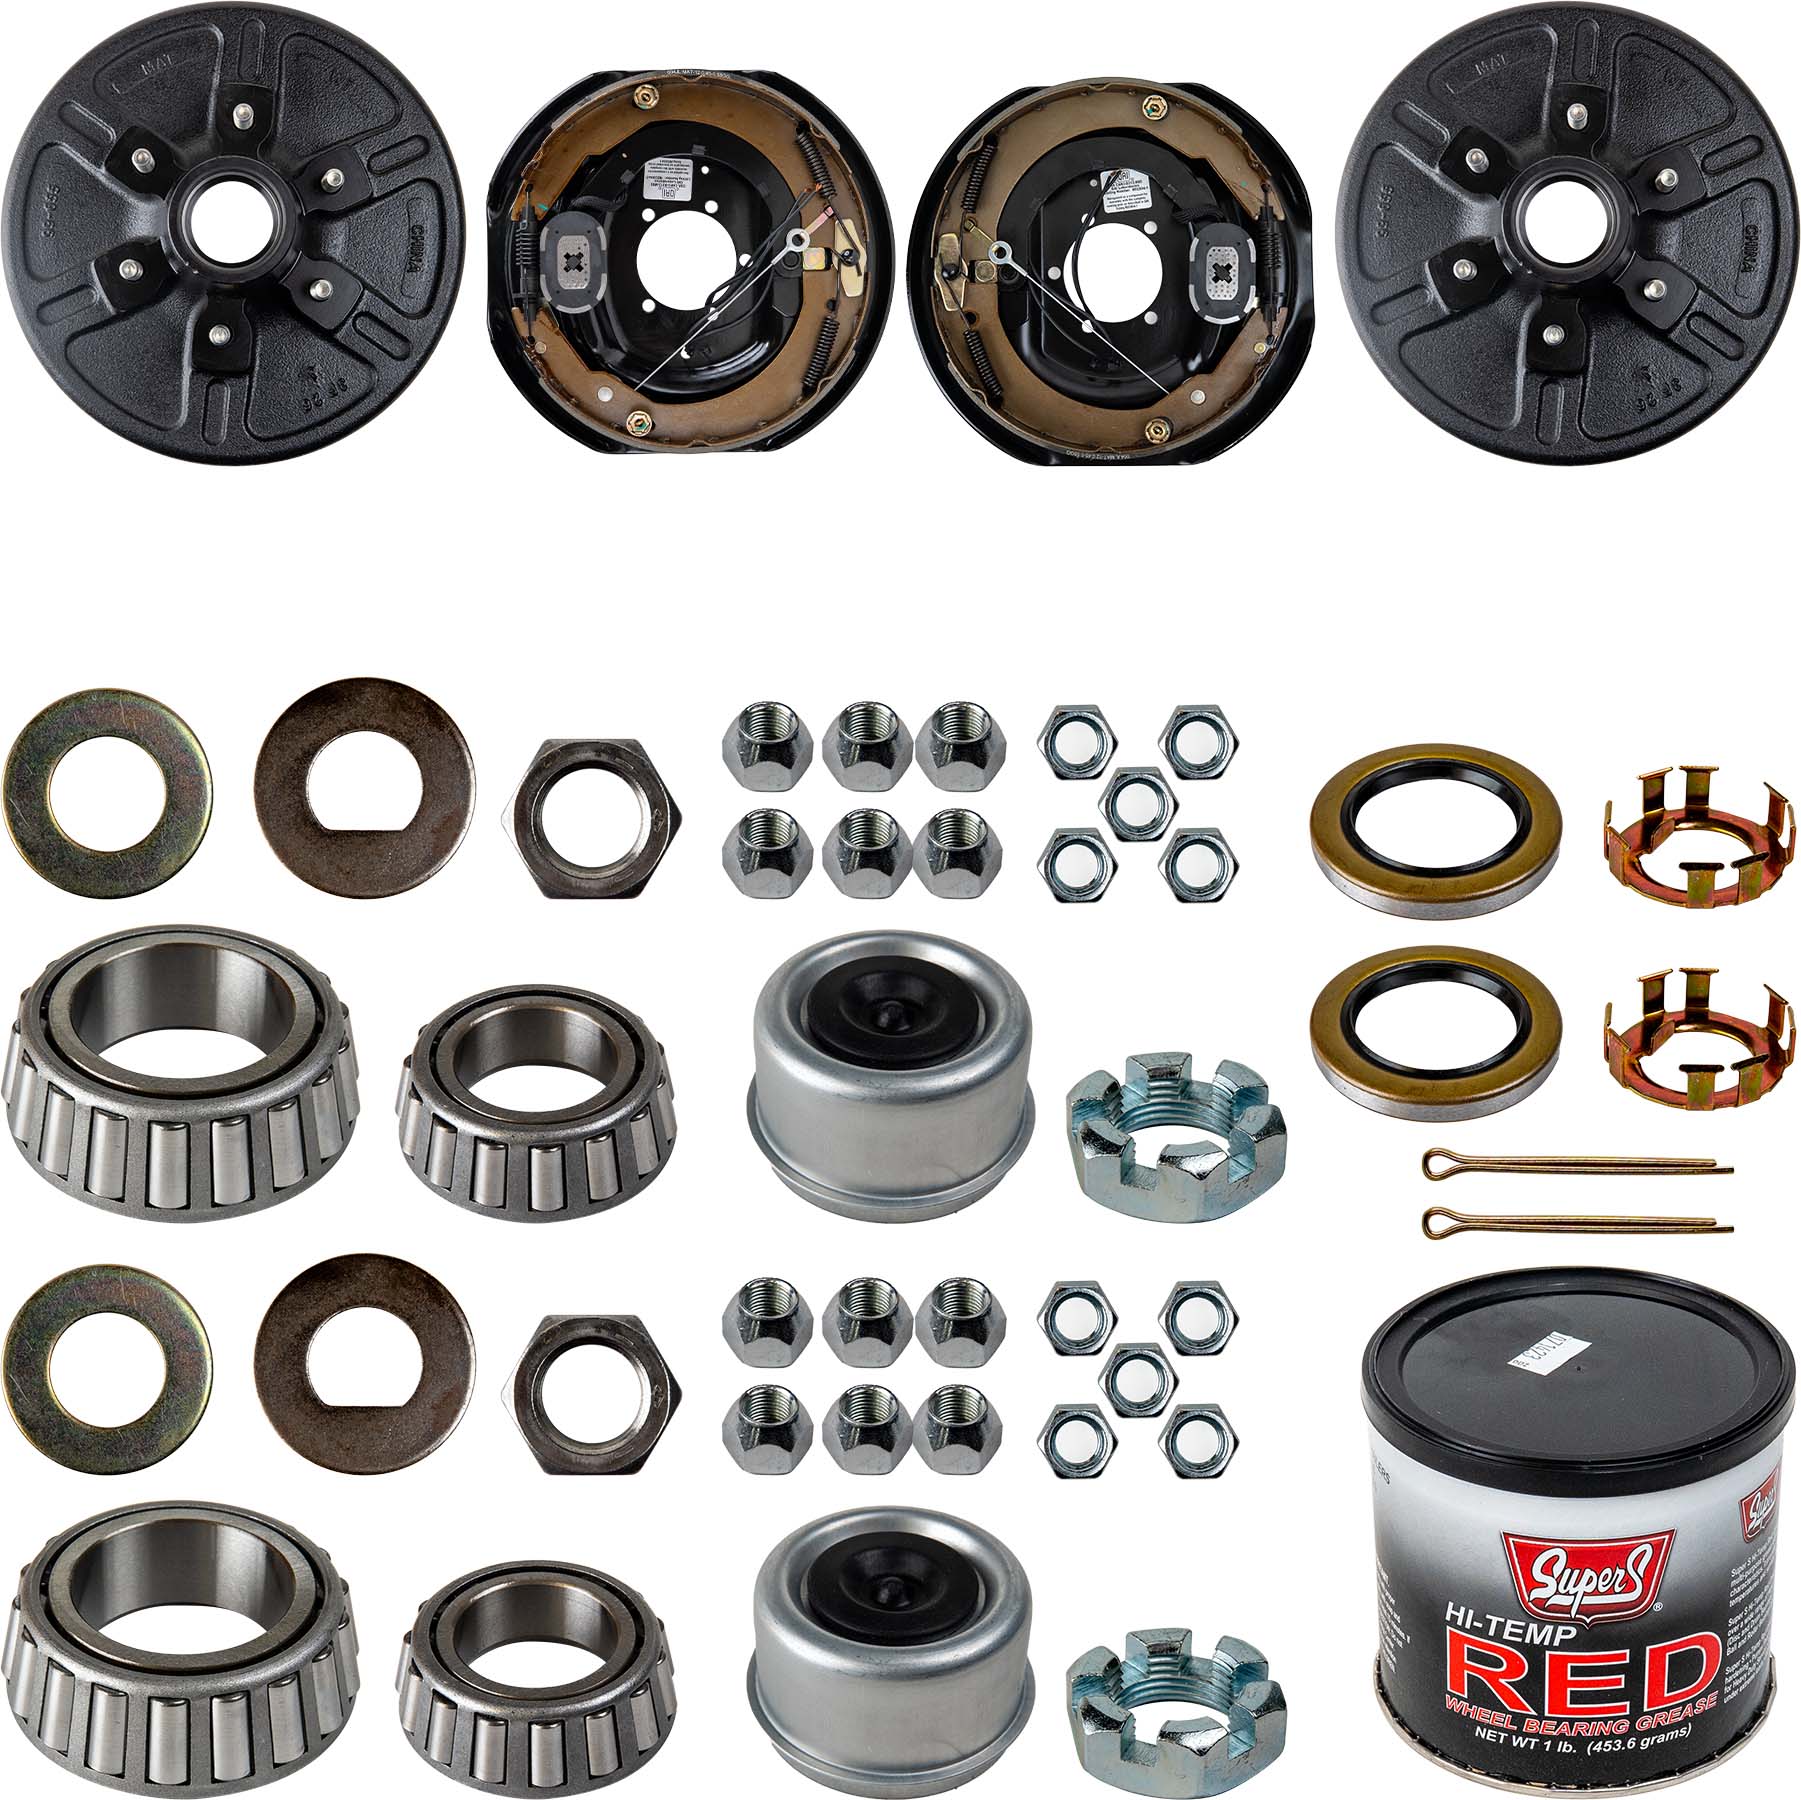 Trailer Axle Kit for 2000 lb w/ Hub, Spindle, Grease Seal, Dust Cap &  Bearings - Reliable Aftermarket Parts, Inc®